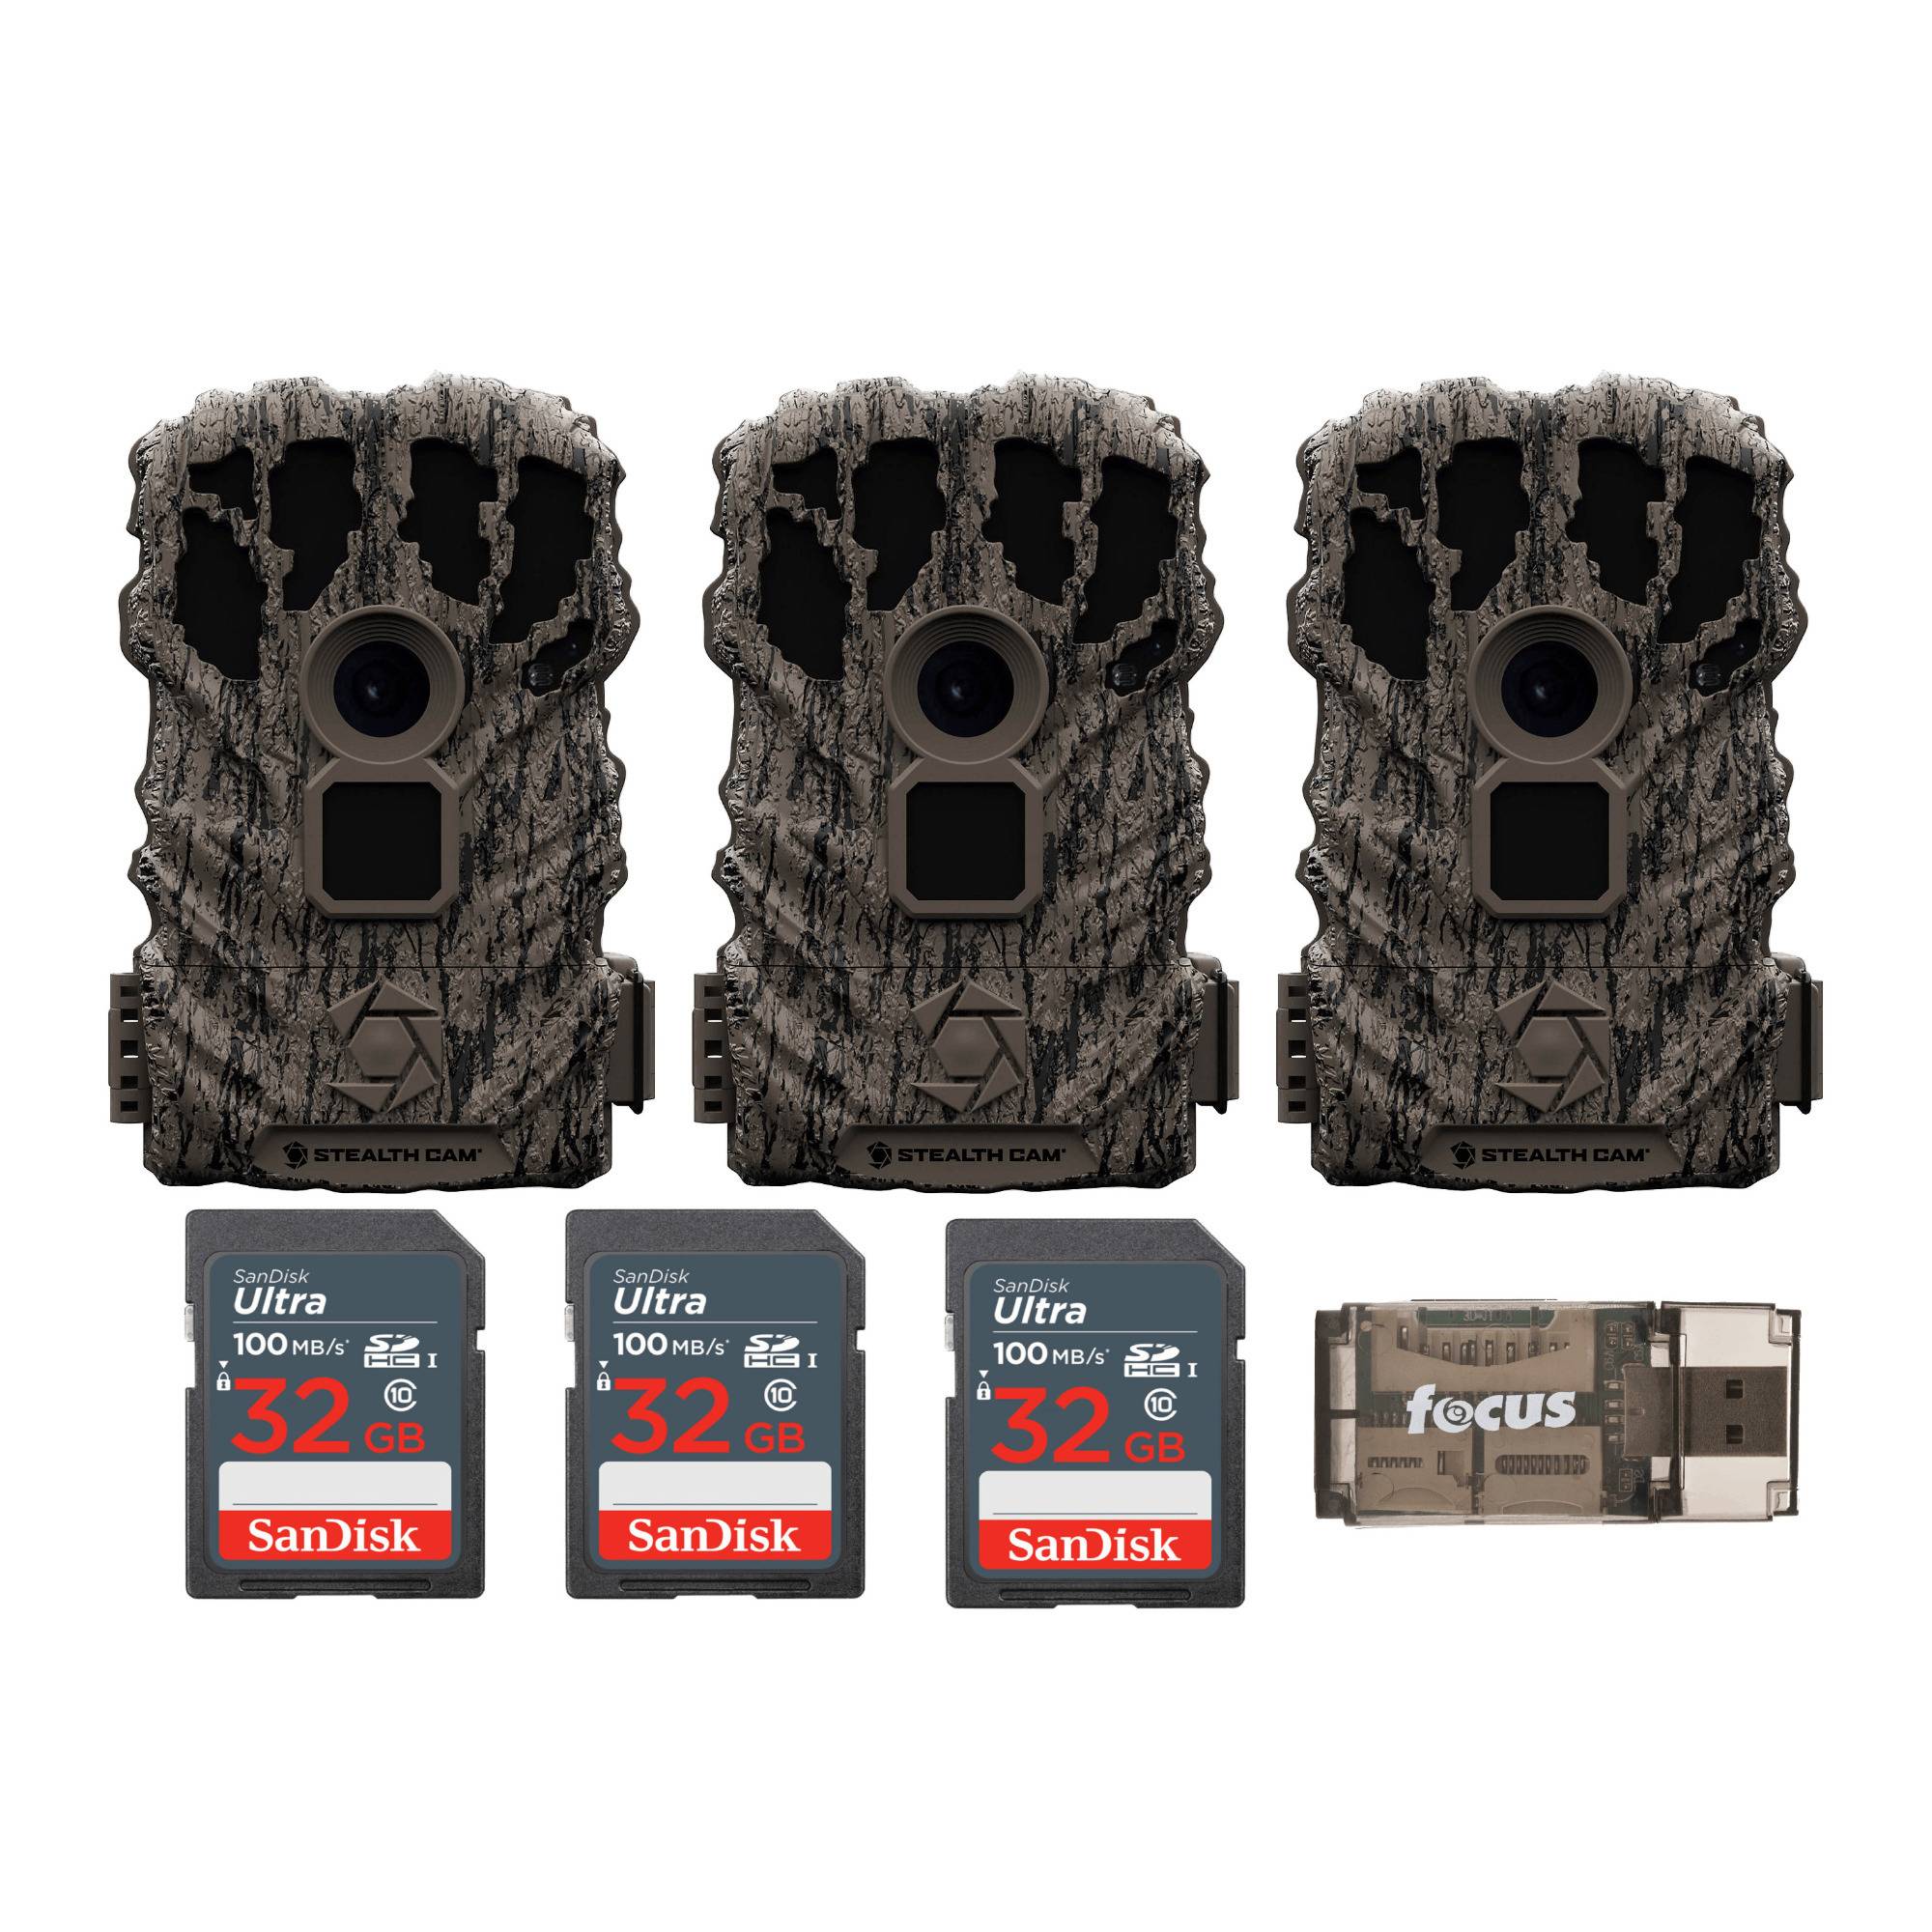 Stealth Cam Browtine 14MP Trail Camera with 32GB Memory Card (3-Pack) and Card Reader (3-Pack)